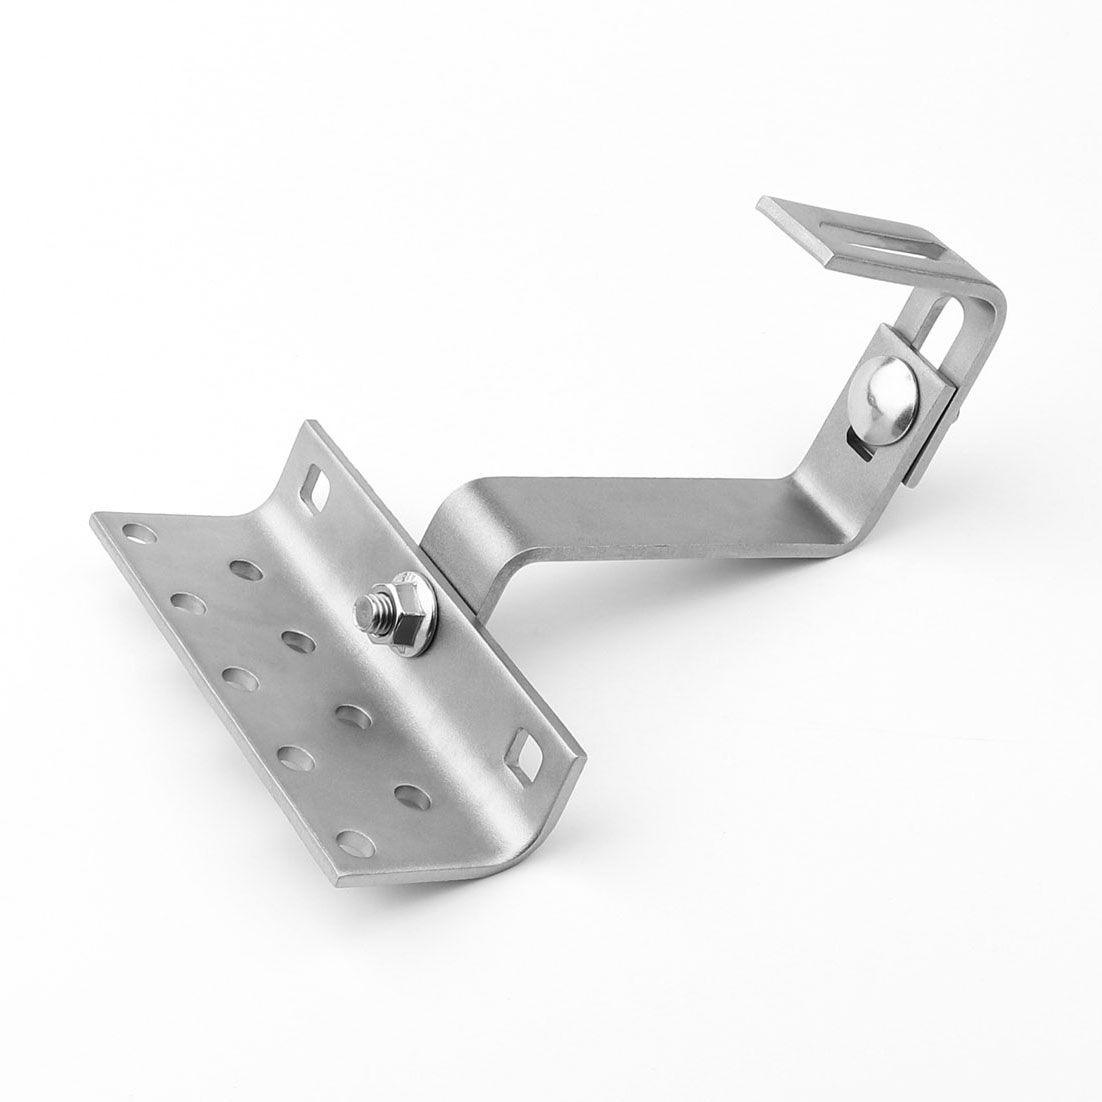 Adjustable Hook with Support Clamp and Screws - VoltaconSolar